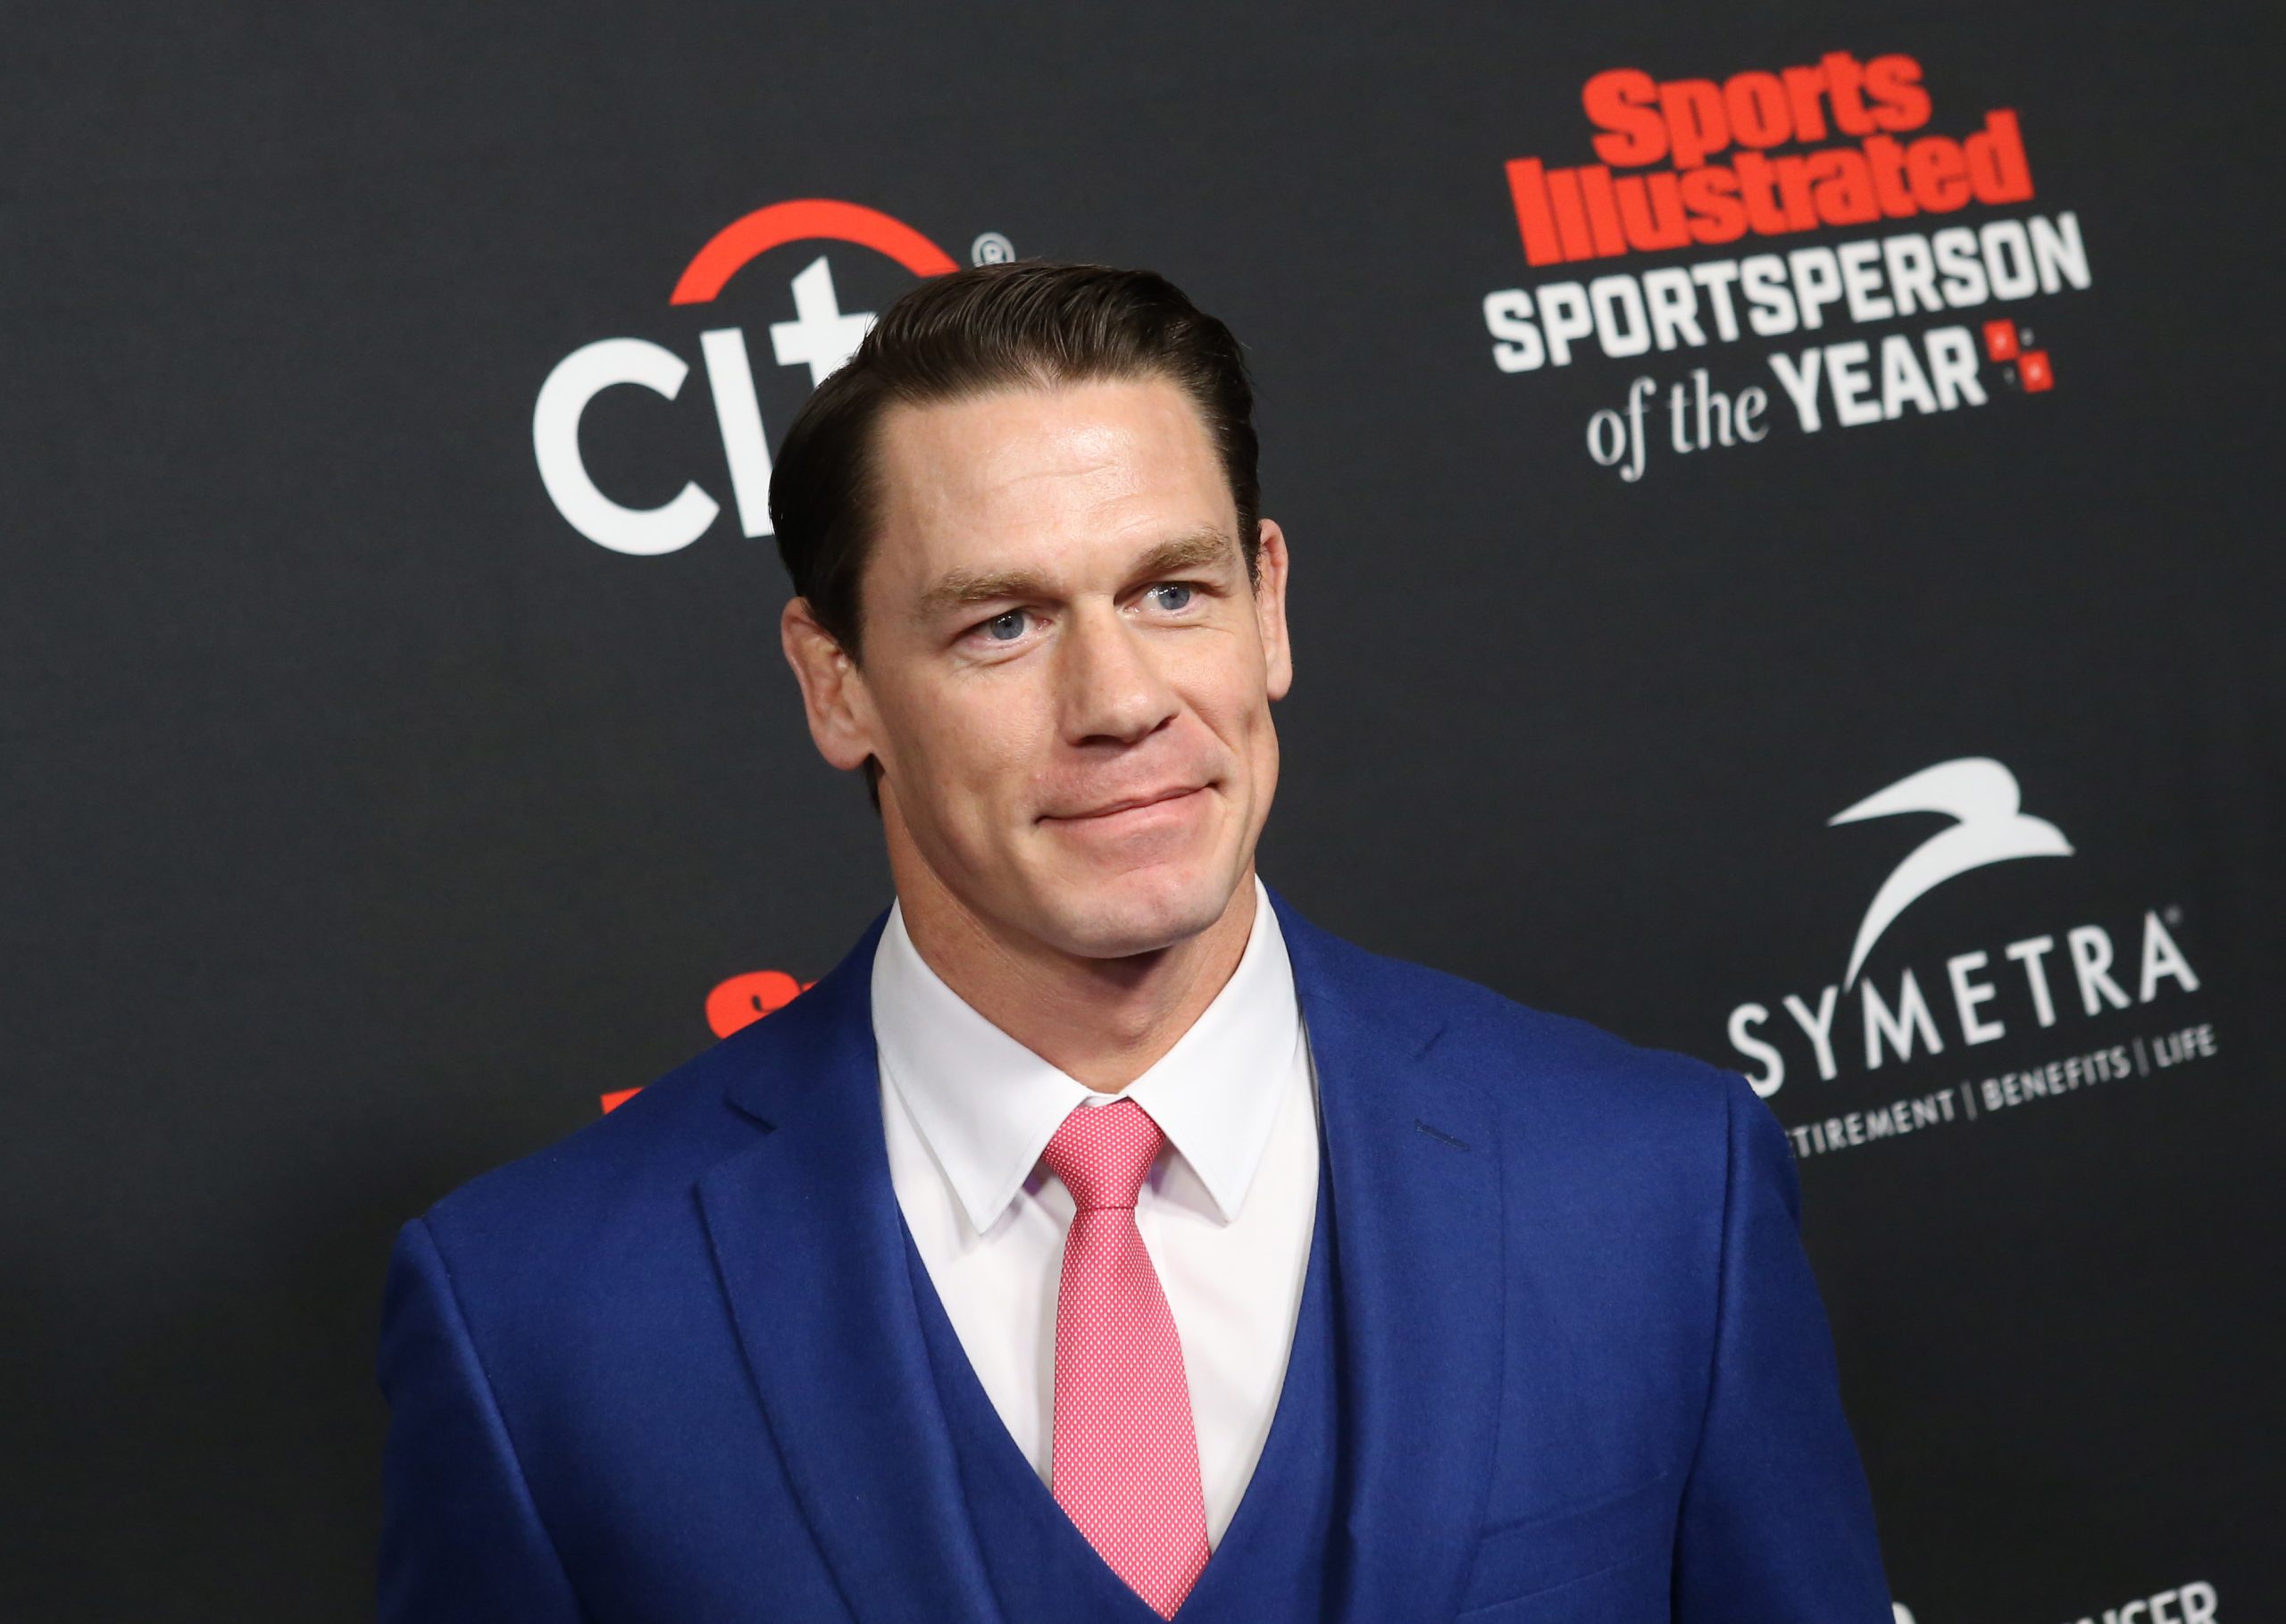 BEVERLY HILLS, CALIFORNIA - DECEMBER 11: John Cena attends Sports Illustrated Sportsperson of The Year Awards held at The Beverly Hilton Hotel on December 11, 2018 in Beverly Hills, California. (Photo by Michael Tran/FilmMagic)